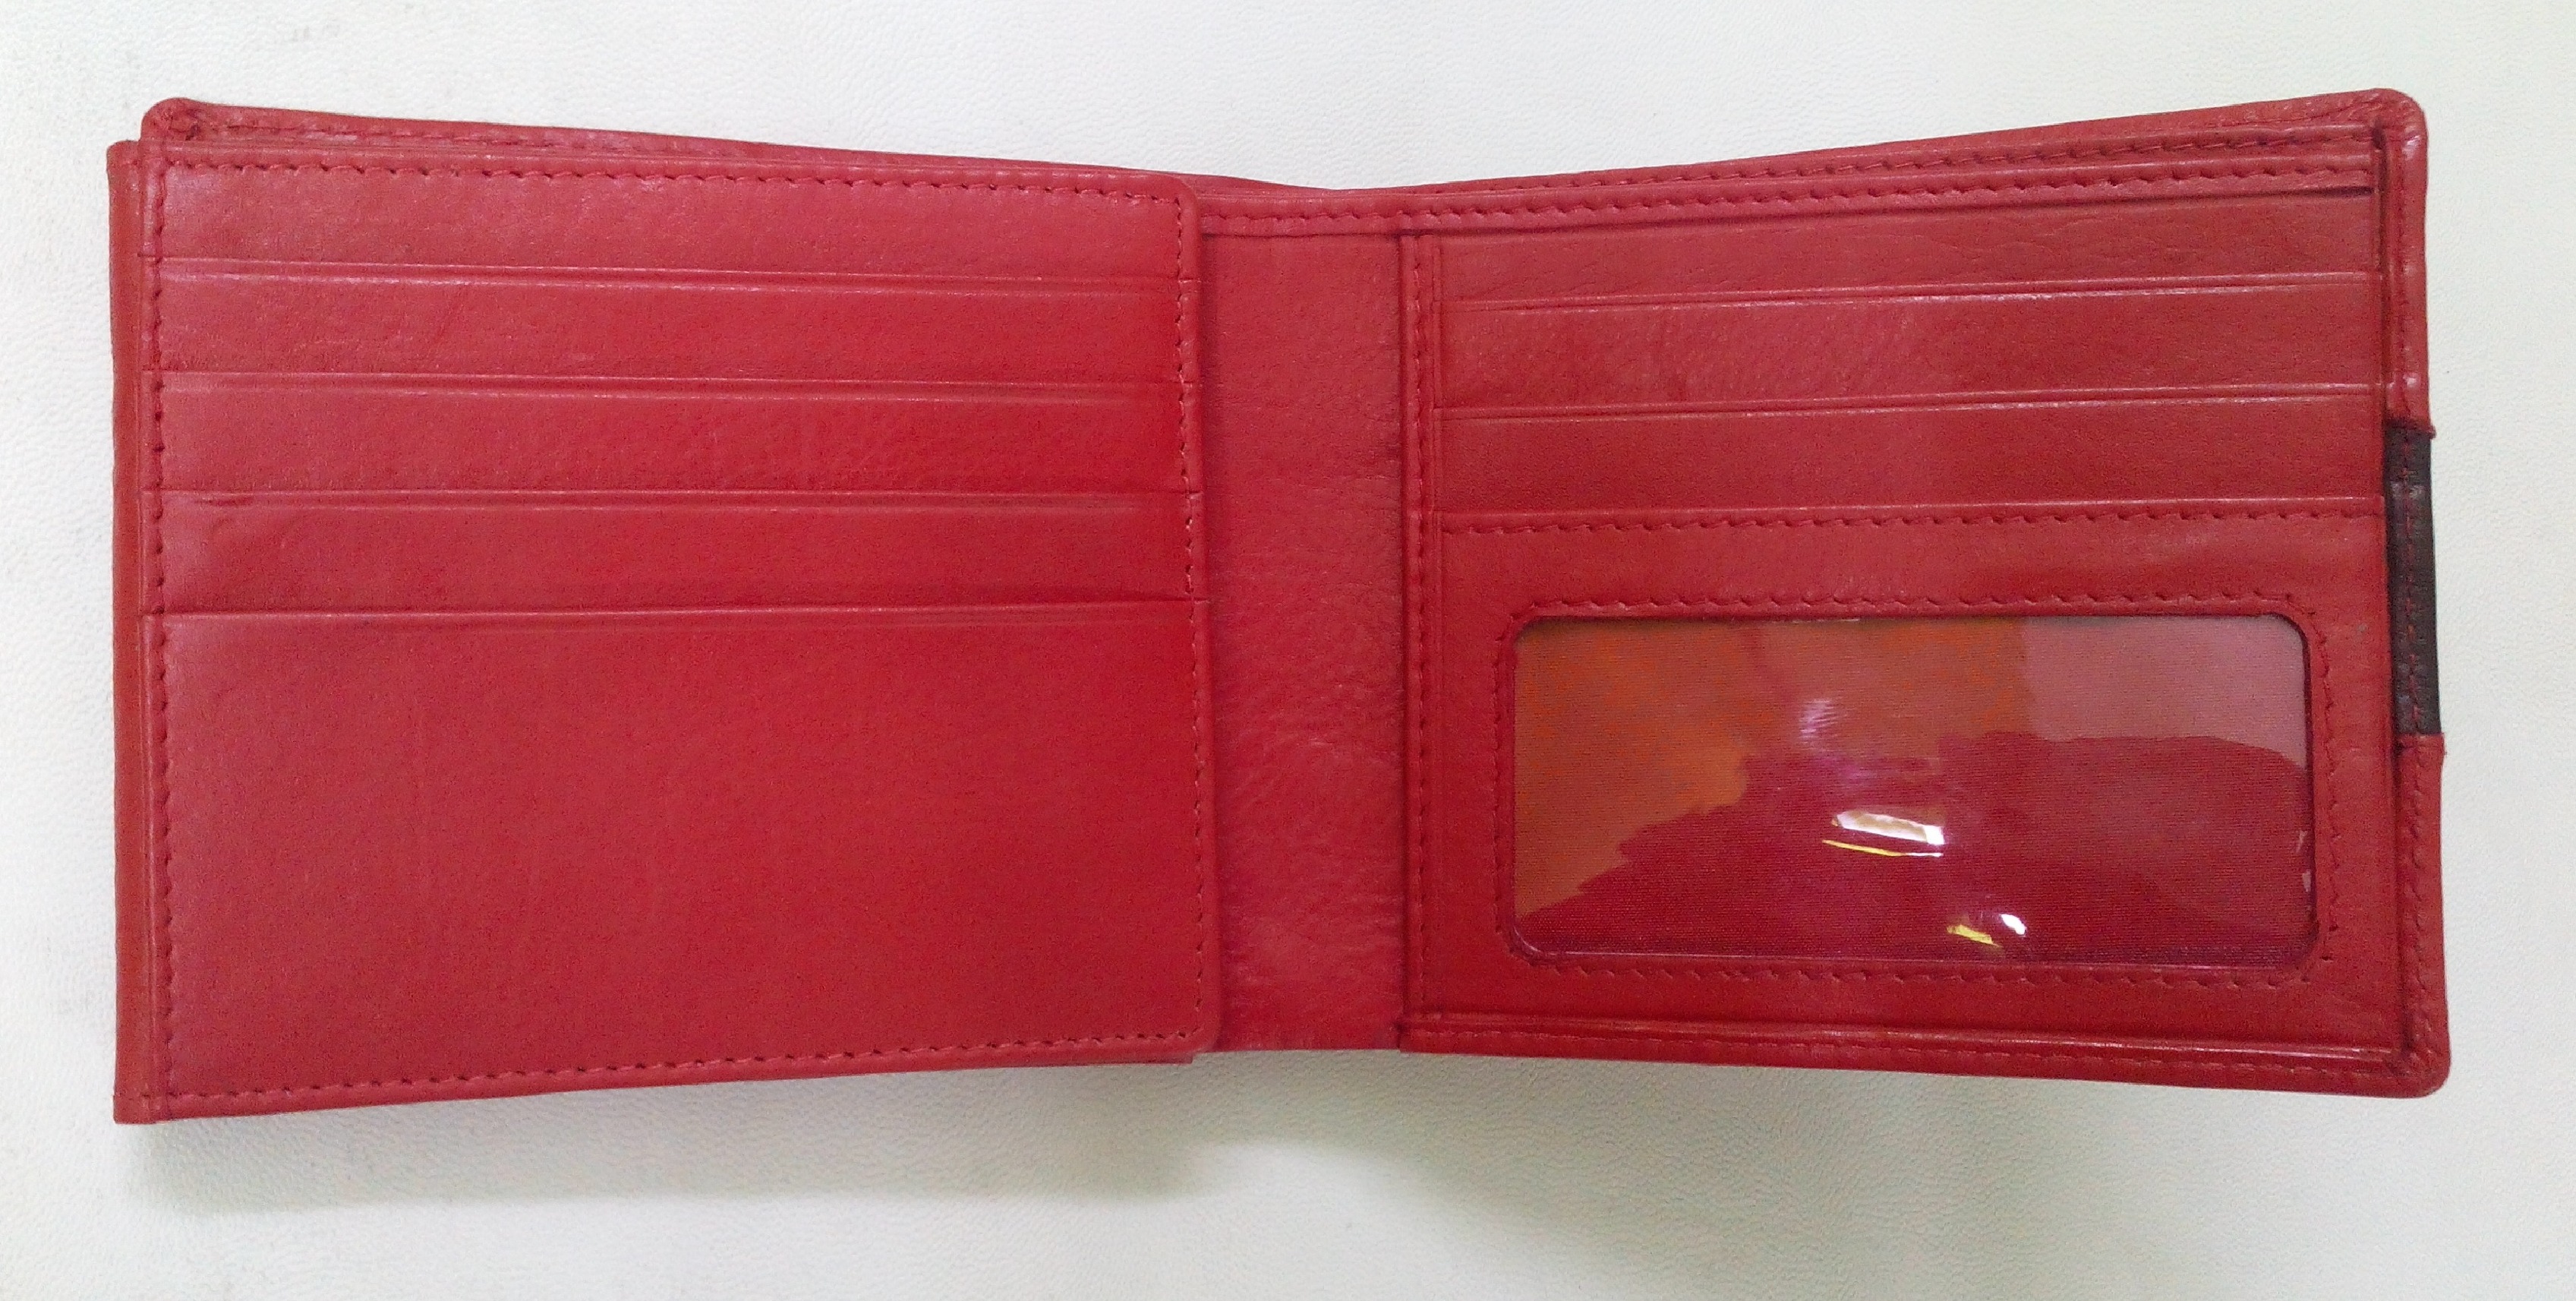 Executive Slim bifold Leather Wallet